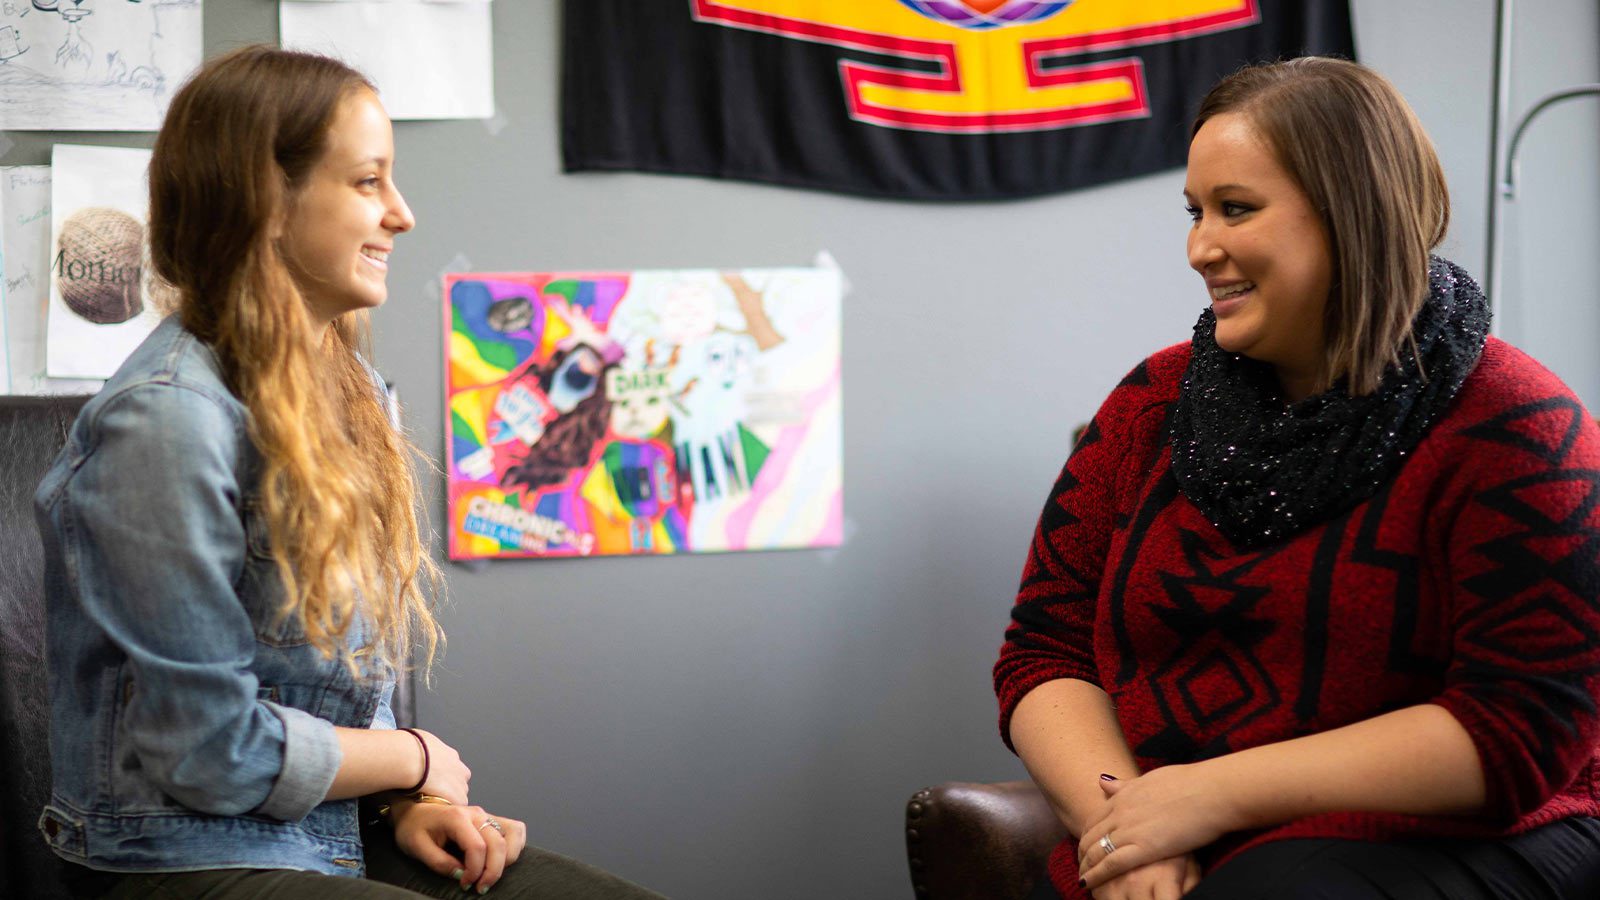 Two women having a cheerful conversation in an office with colorful posters on the wall.